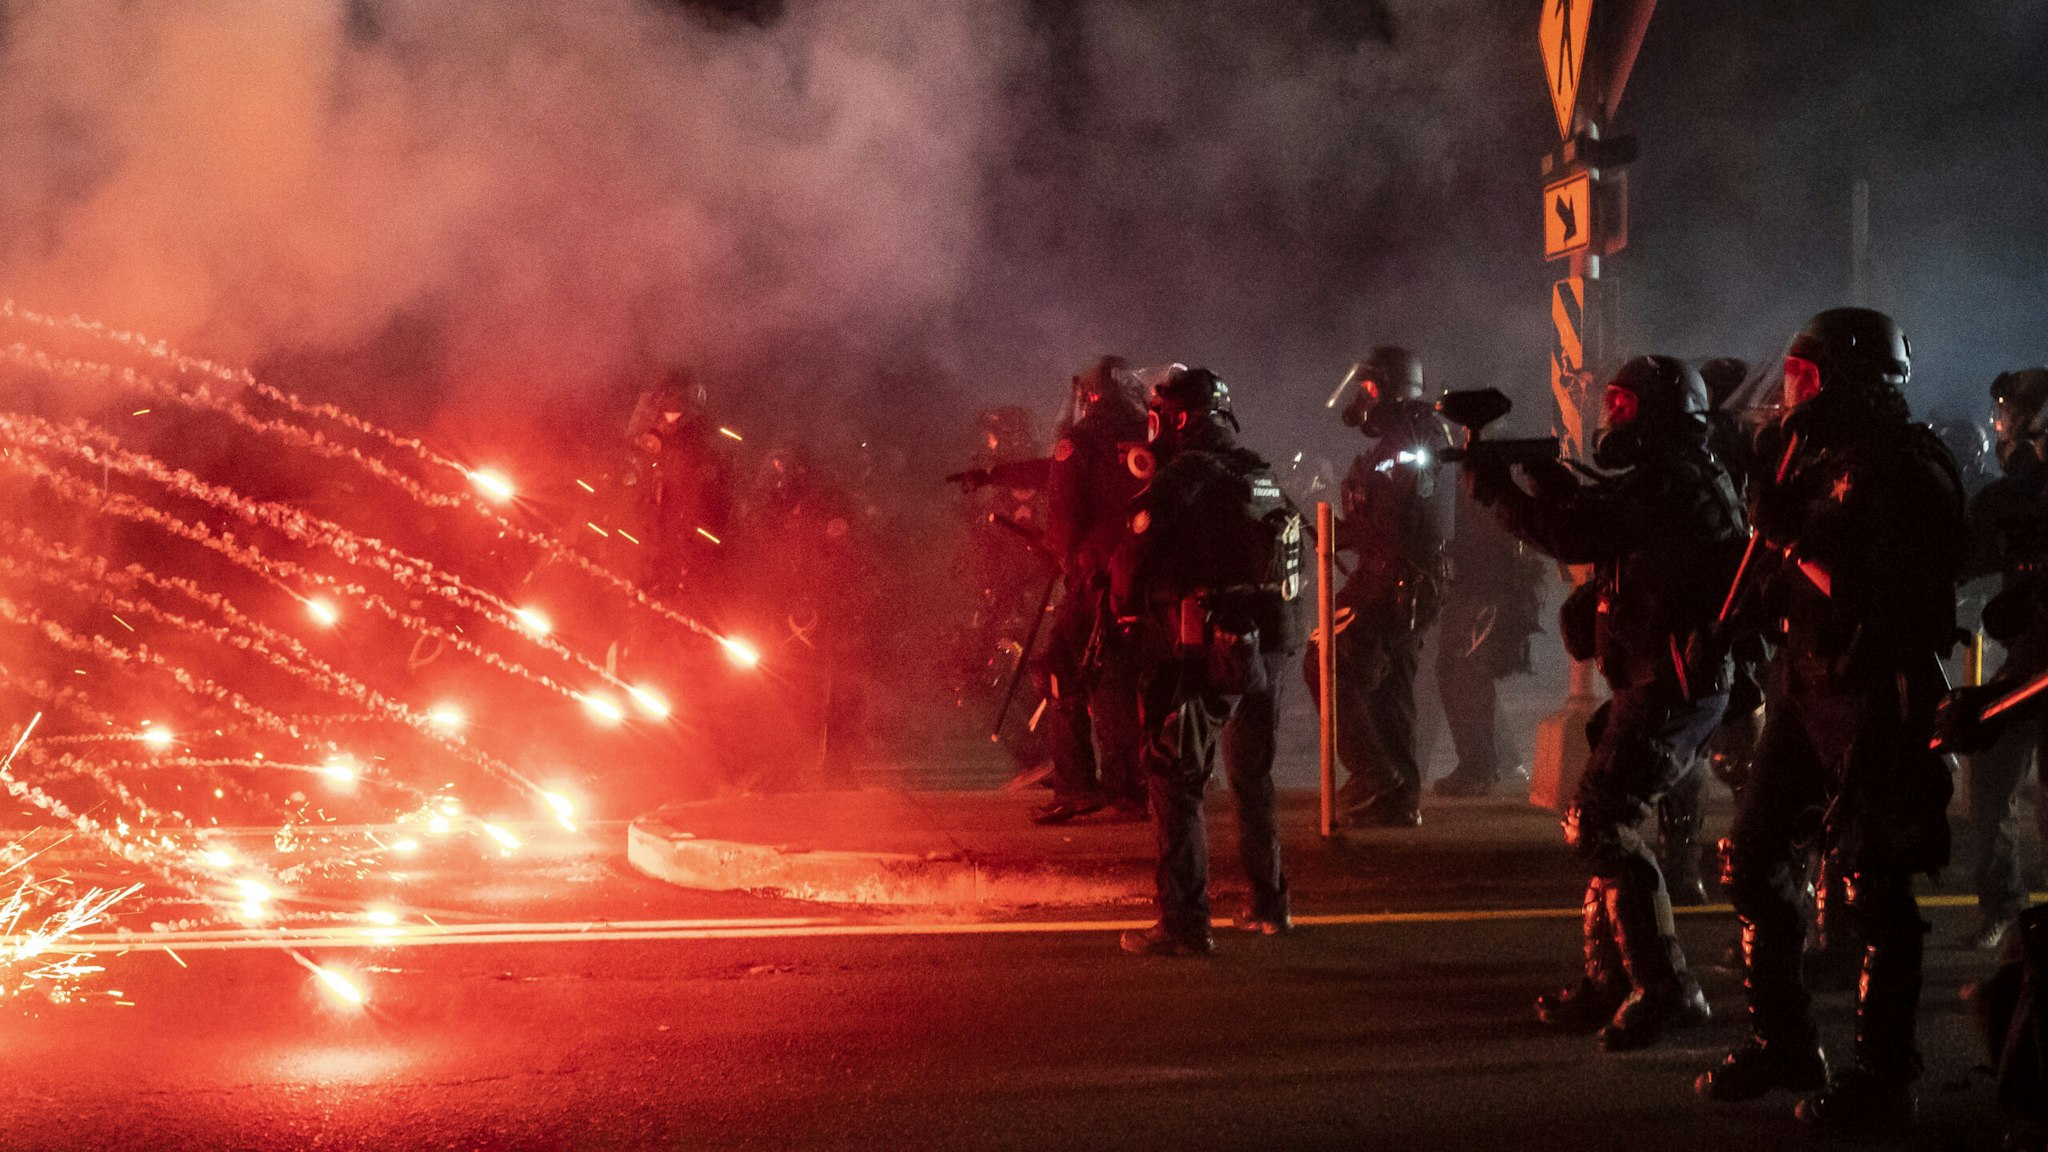 PORTLAND, OREGON - SEPTEMBER 5: Oregon State Troopers and Portland police advance through tear gas and fire works while dispersing a protest against police brutality and racial injustice on September 5, 2020 in Portland, Oregon. Portland has seen nightly protests for the past 100 days following the death of George Floyd in police custody.